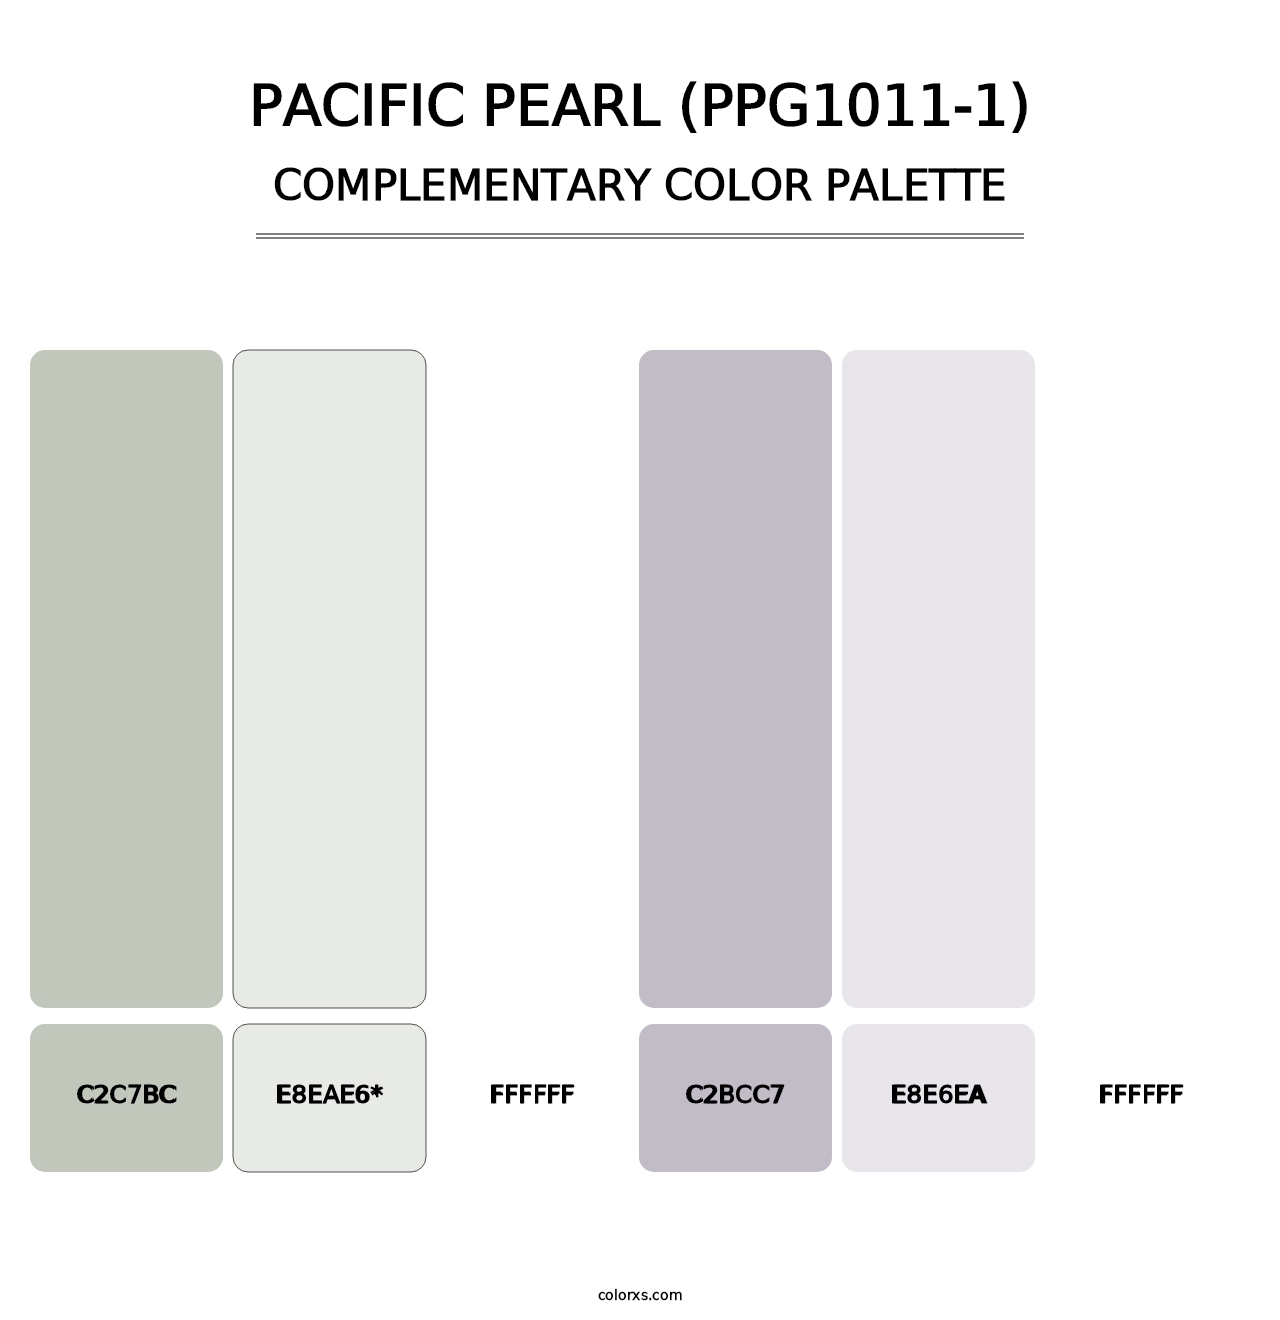 Pacific Pearl (PPG1011-1) - Complementary Color Palette